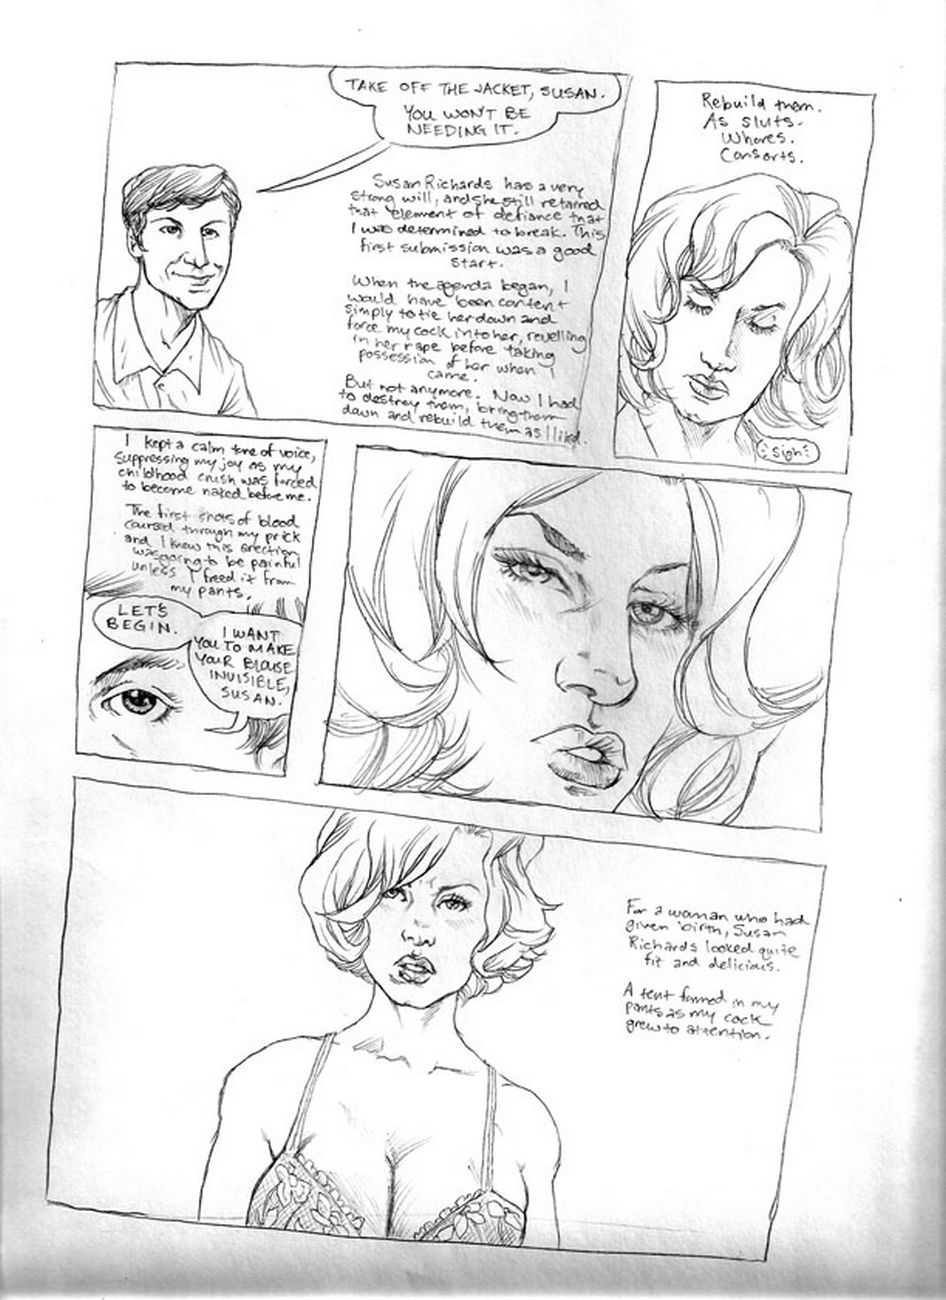 Submission Agenda 5 - The Invisible Woman page 8.